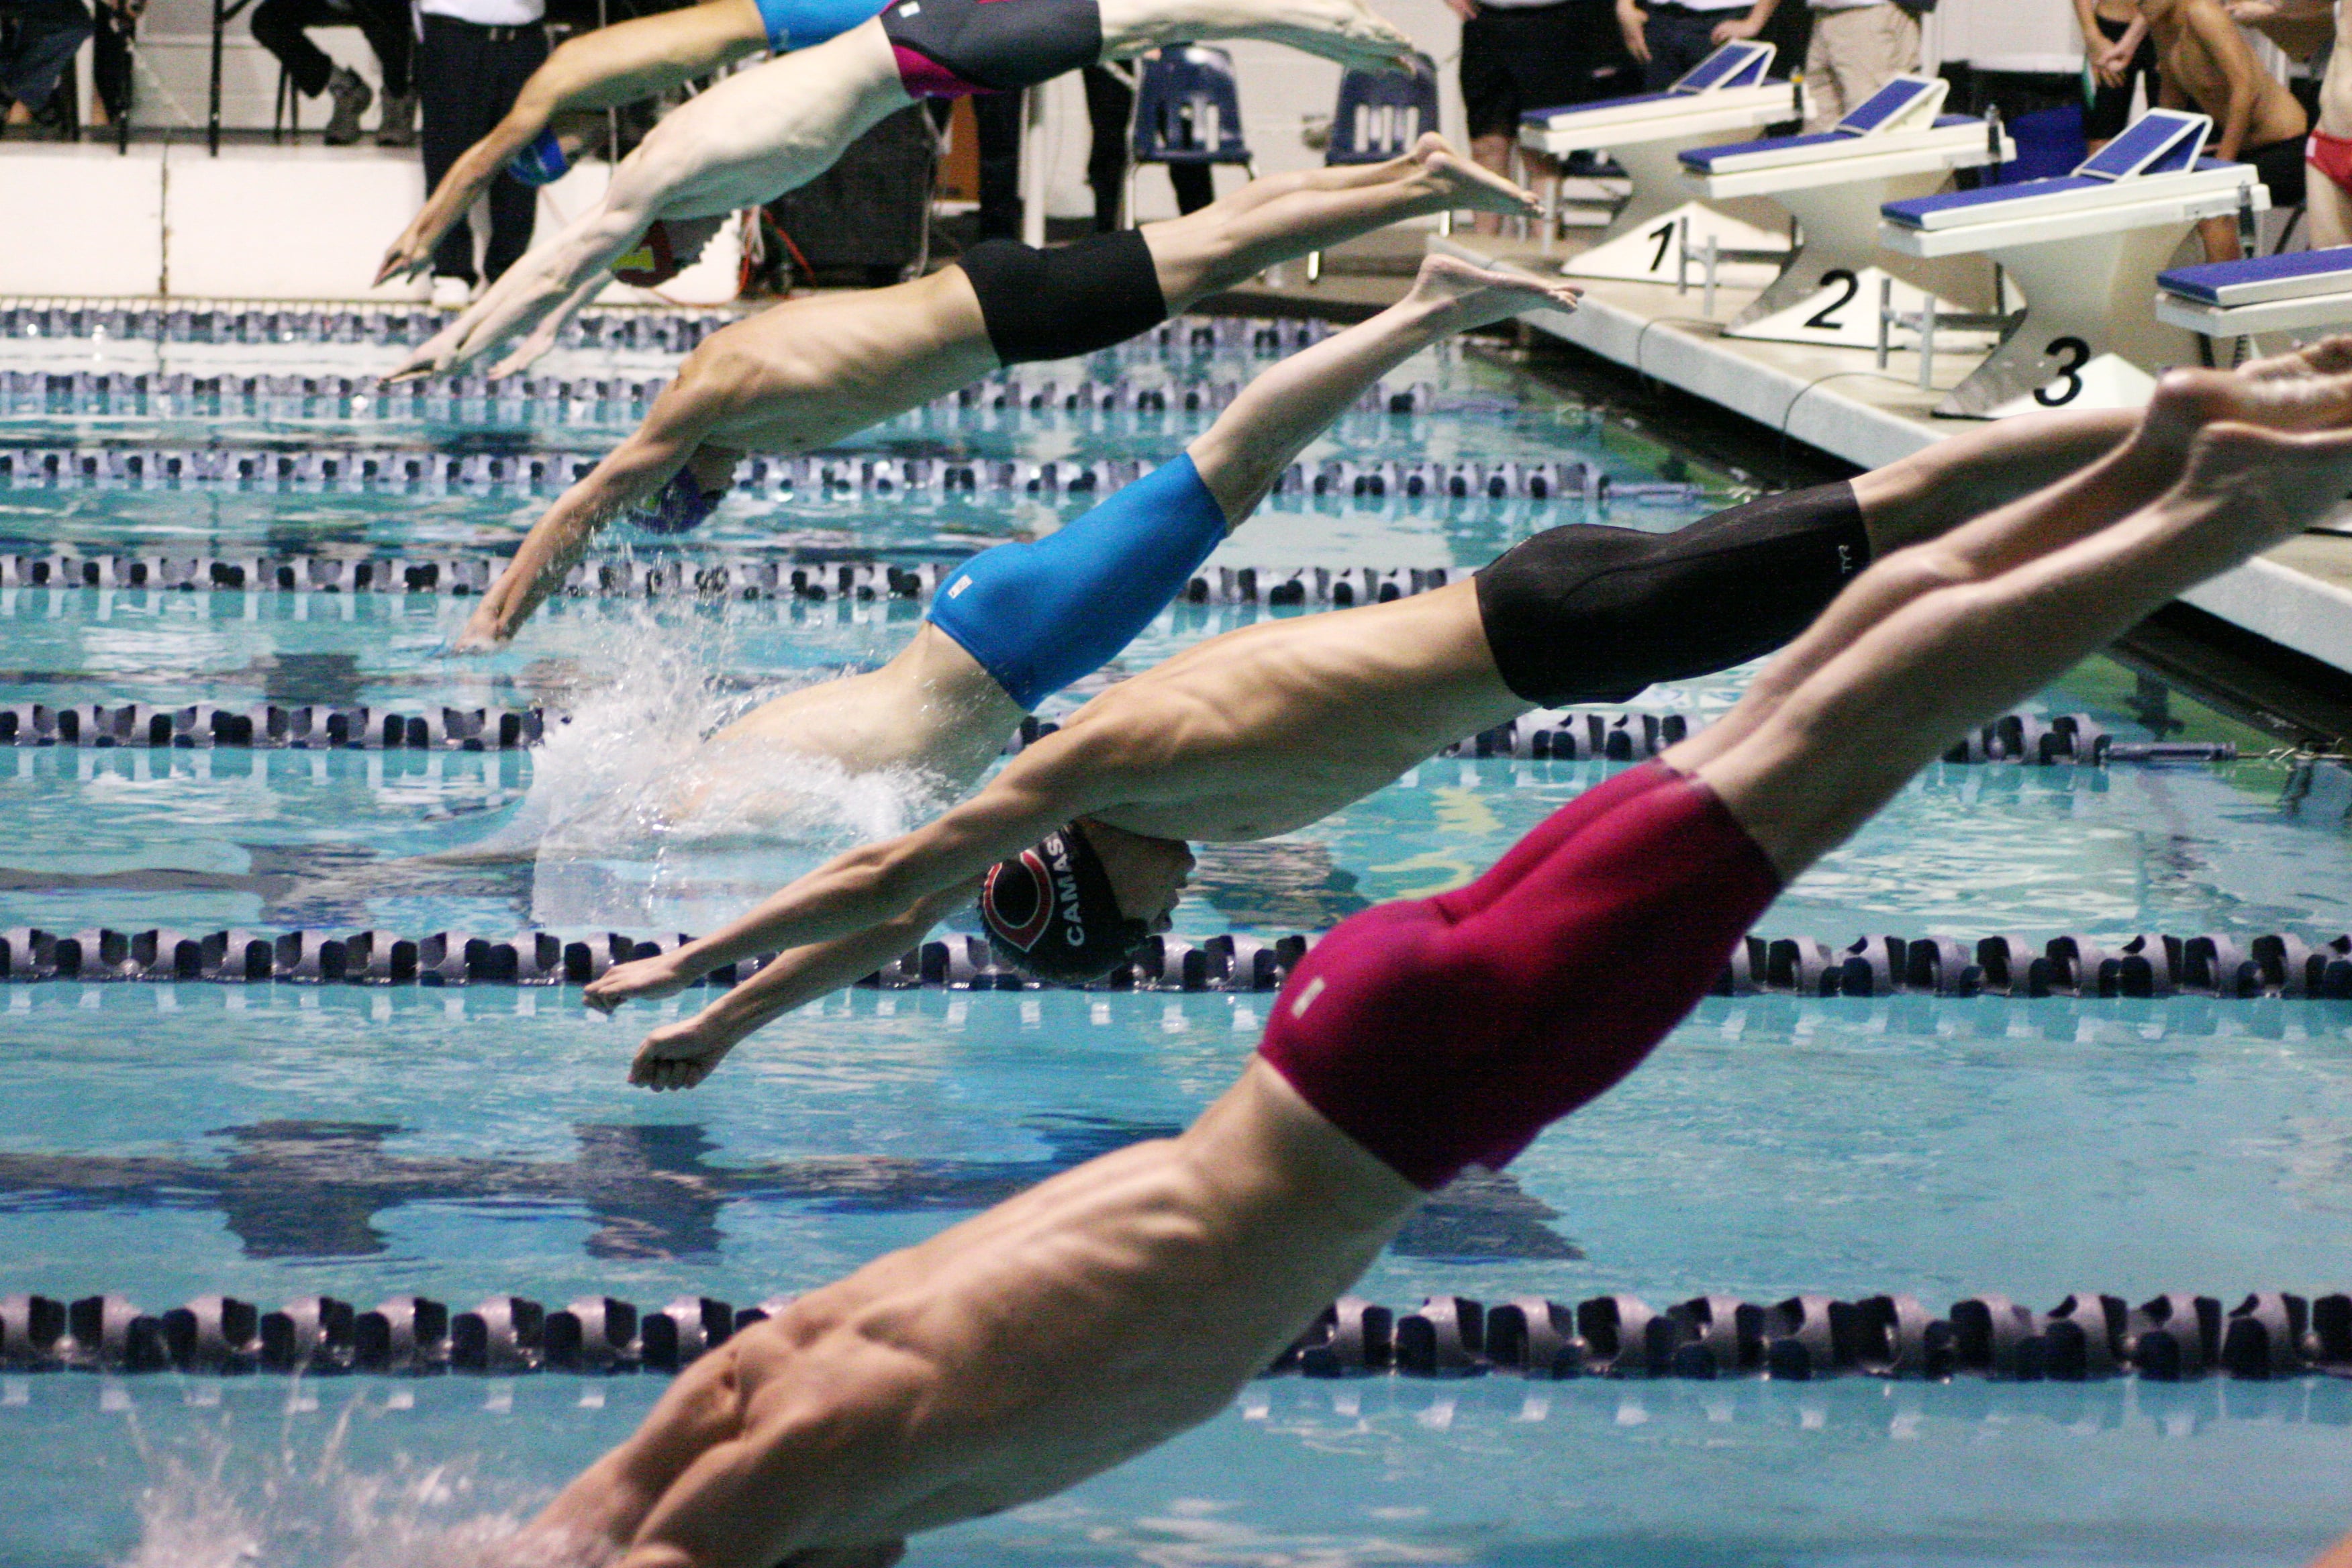 Tom Utas dives in to begin the 400 freestyle relay preliminary event.